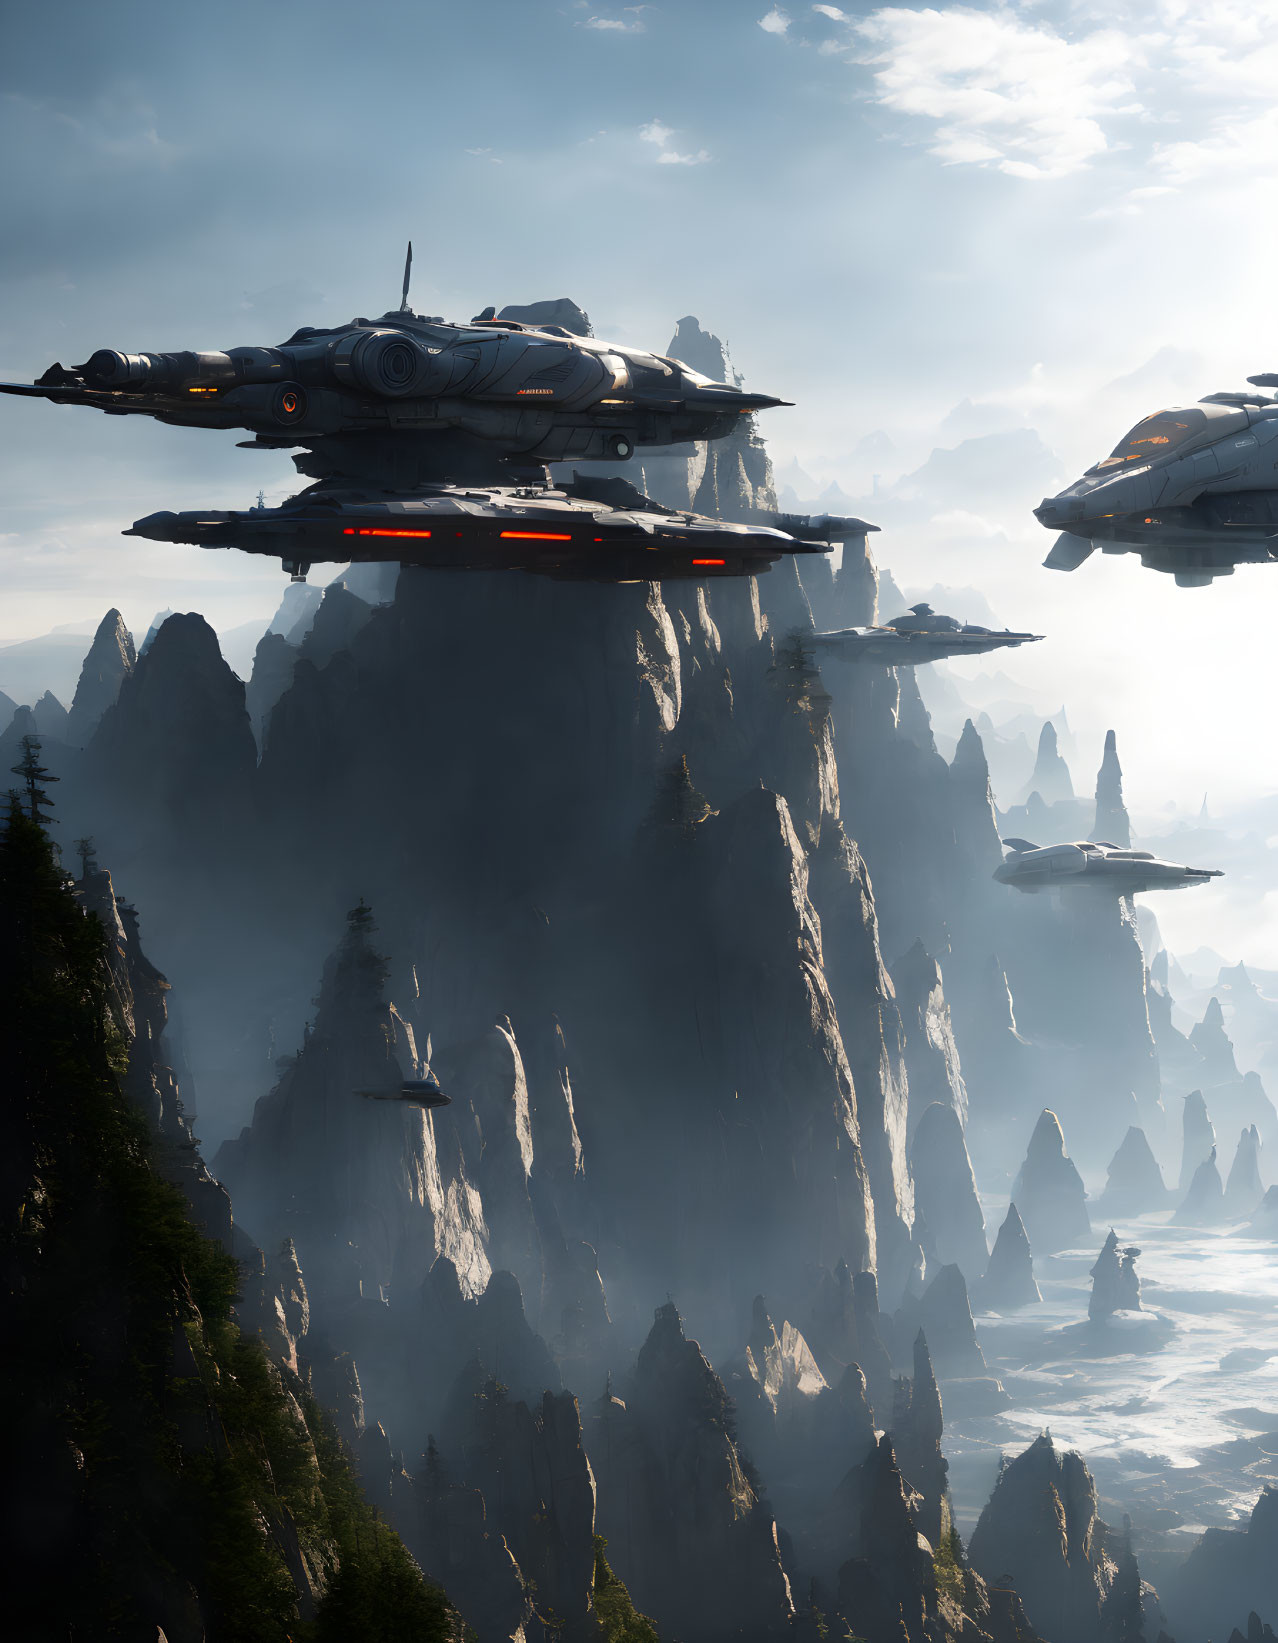 Futuristic aircraft above misty mountain peaks with sunlight.